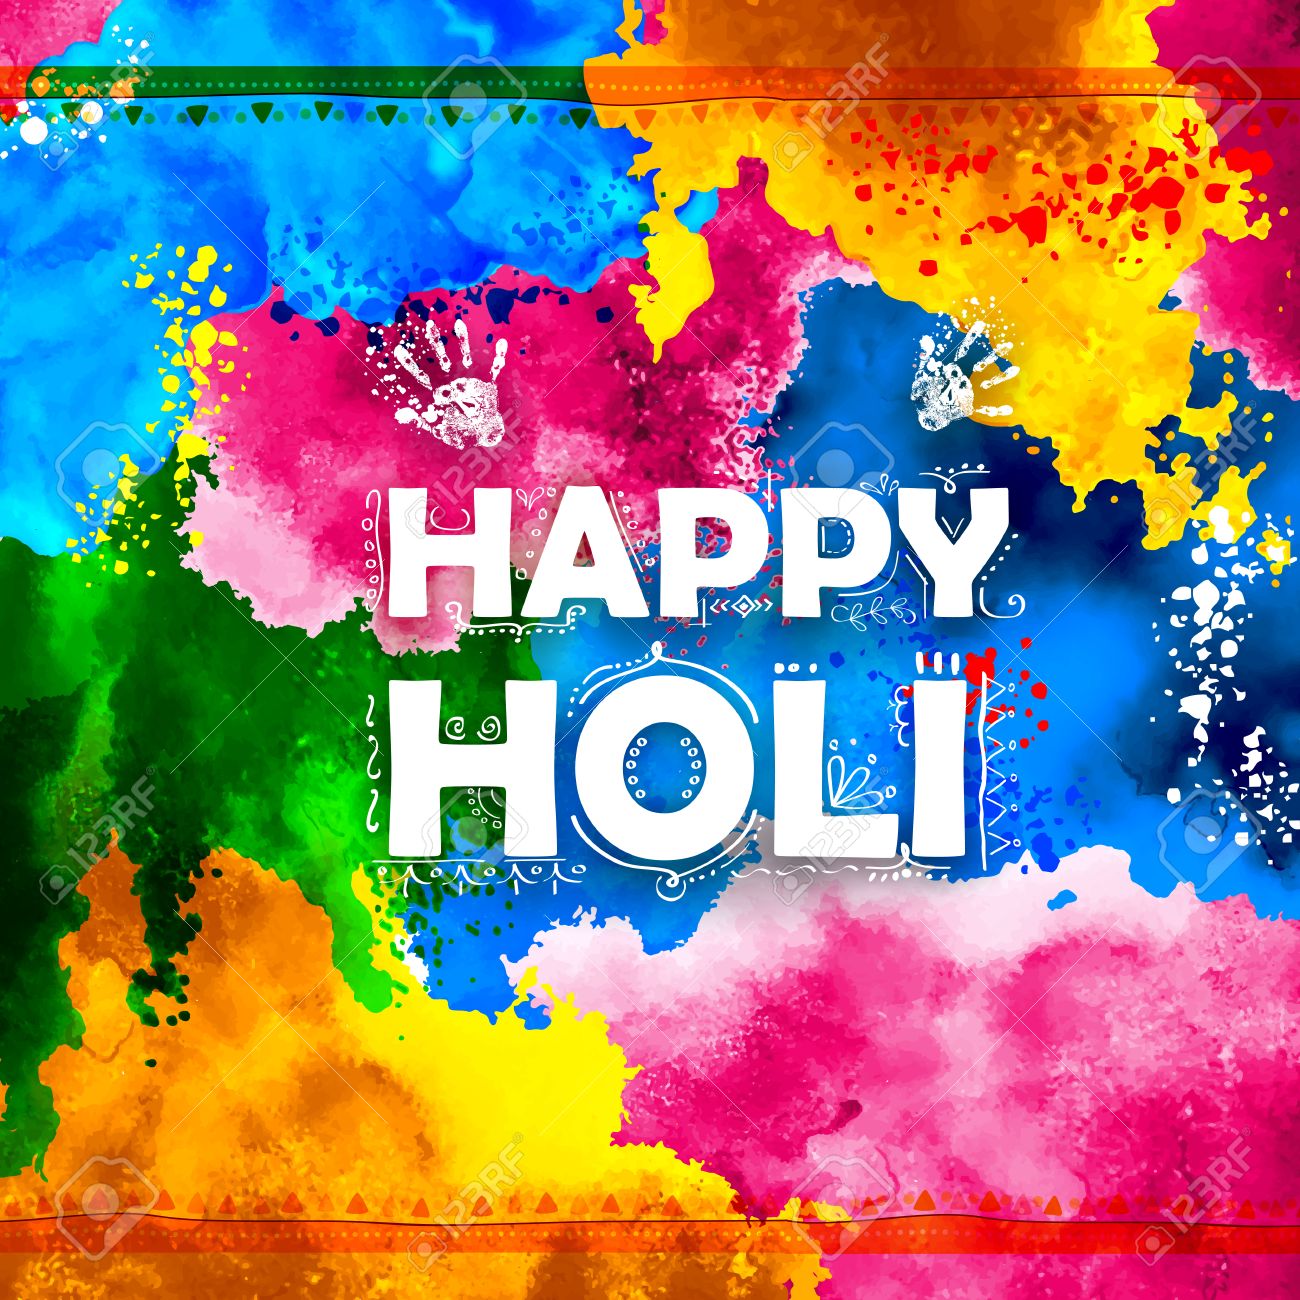 Illustration Of Abstract Colorful Happy Holi Background Royalty